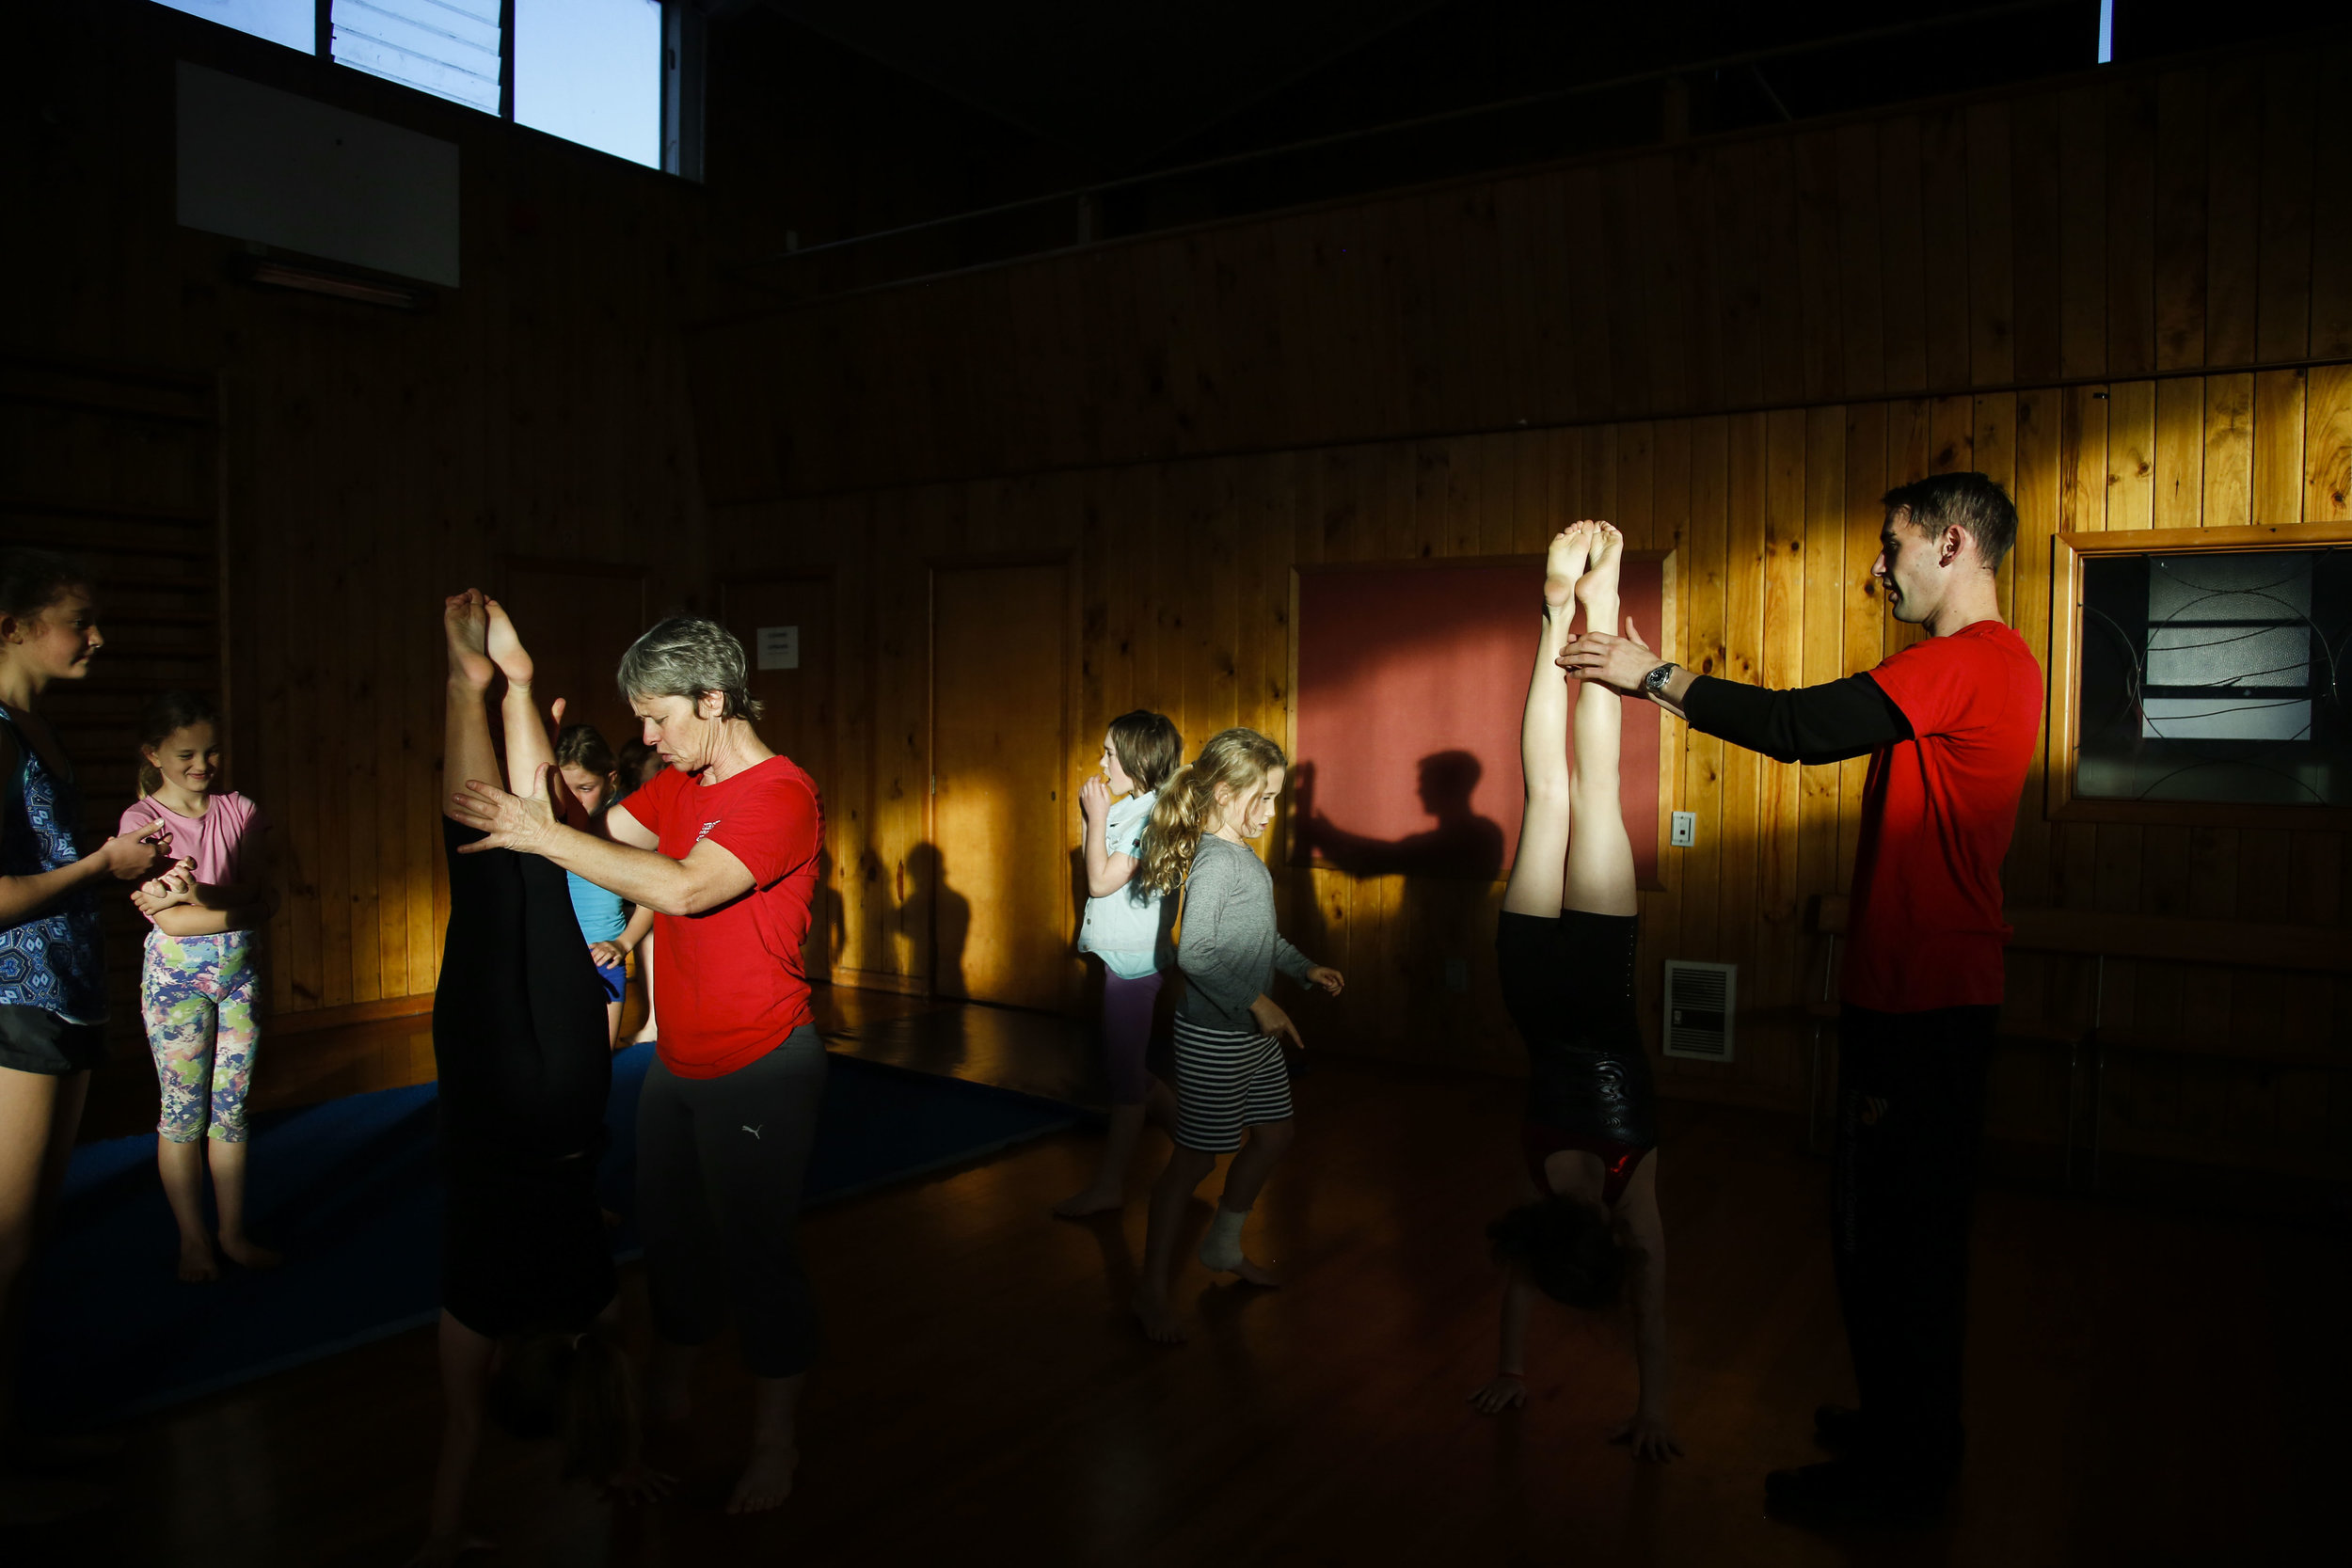  Wingfield (left) helps a student with her handstands during a class at the Christchurch Circus Centre in Christchurch, NZ on May 10, 2016. Wingfield and Carrow lost their original circus school to the 2011 Christchurch Earthquake. "We lost our circu